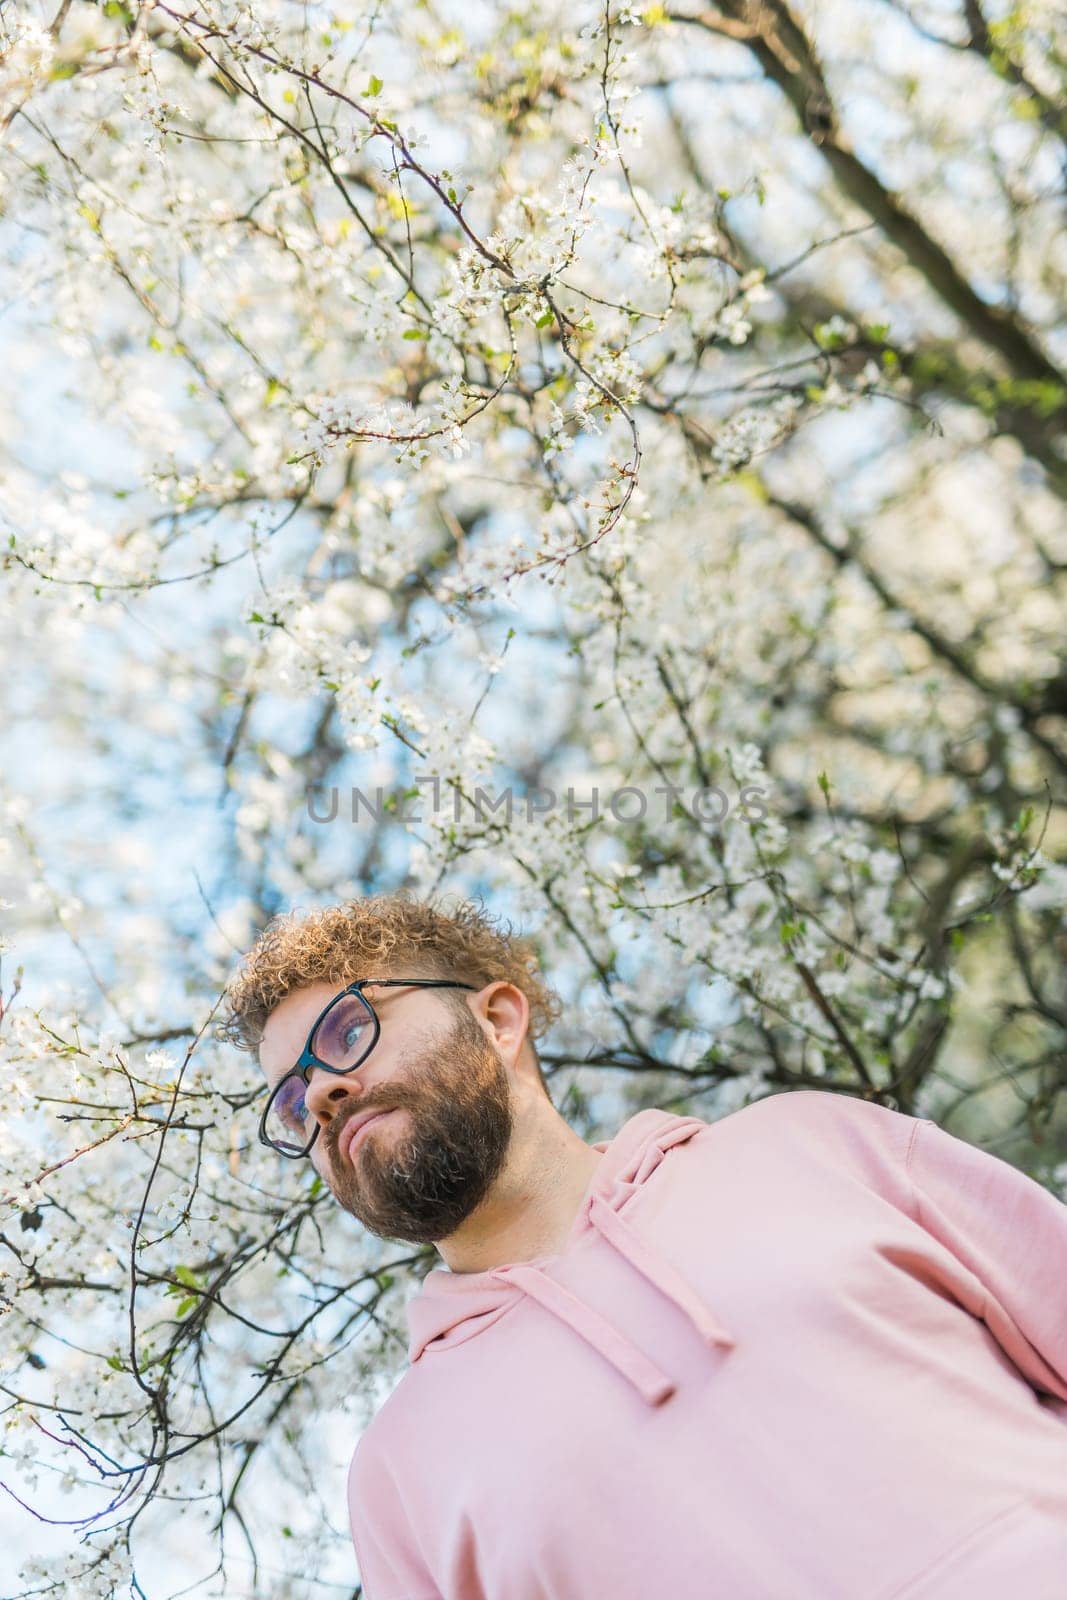 Handsome man outdoors portrait on background cherry blossoms or apple blossoms. Millennial generation guy and new masculinity concept by Satura86